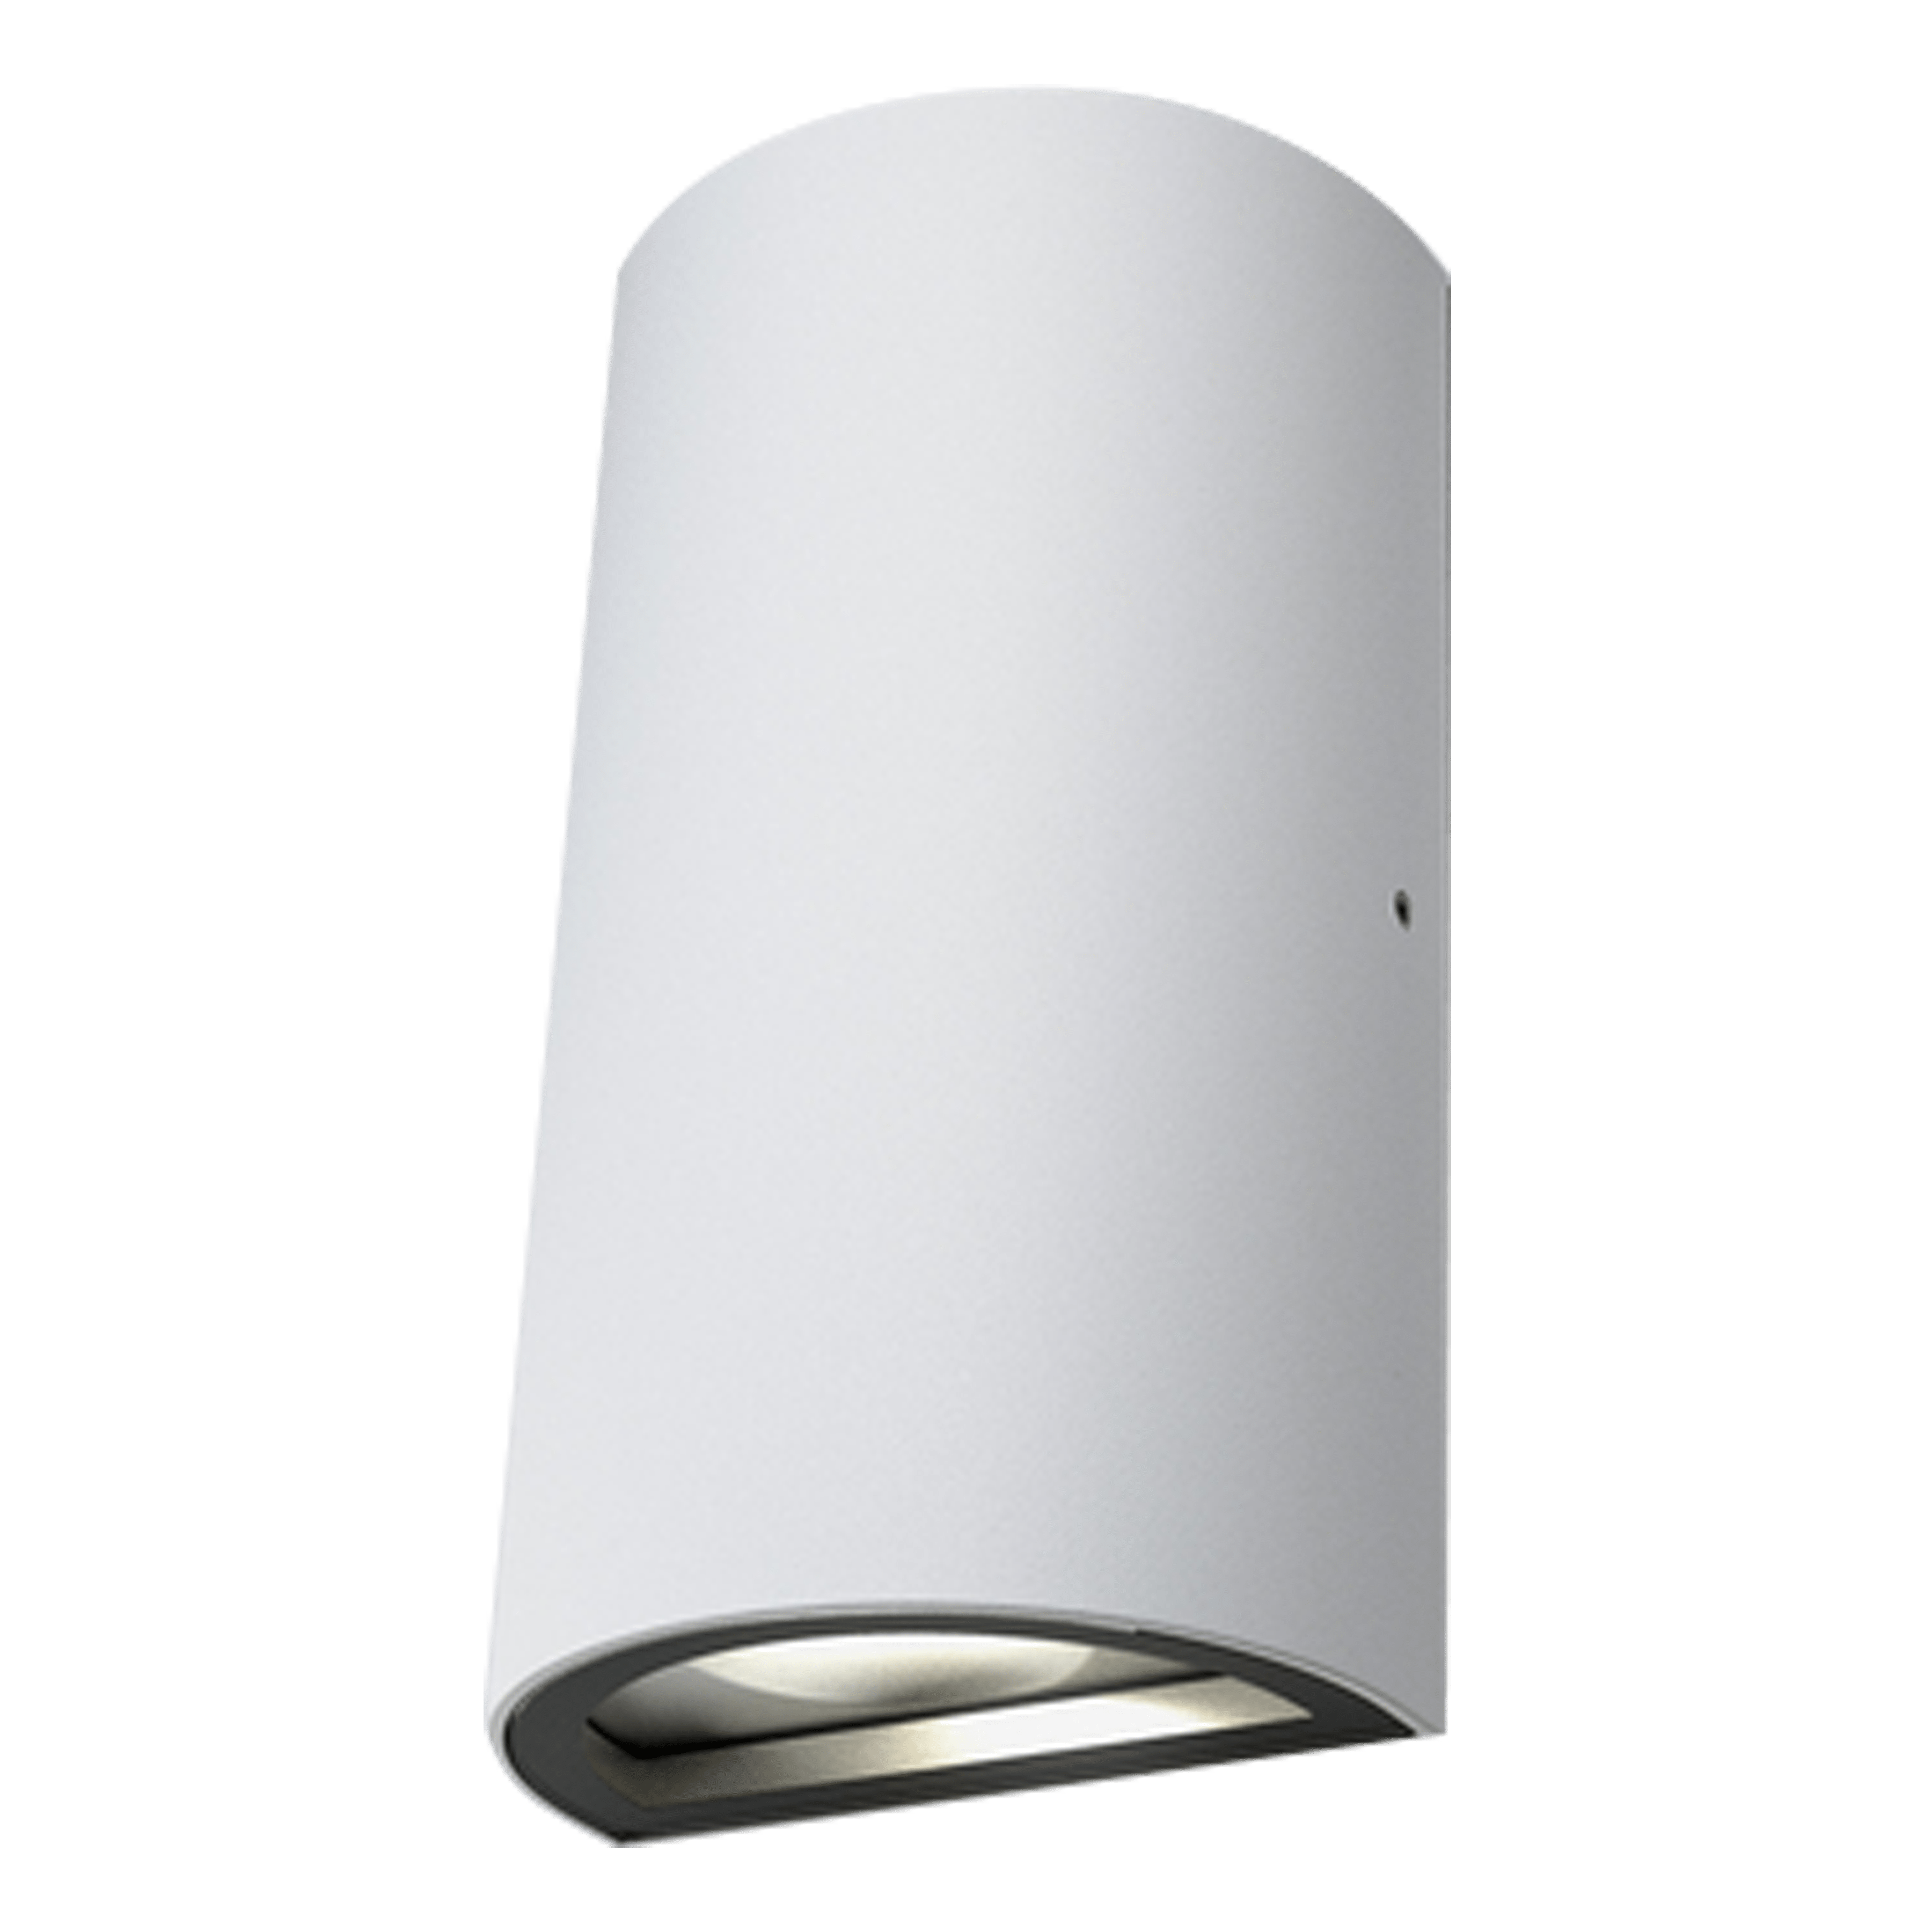 Sigatoka Electric Ltd - Ledvance Stylish Design Round Faced Led 12W Outdoor Facade Up down Wall Light IP54